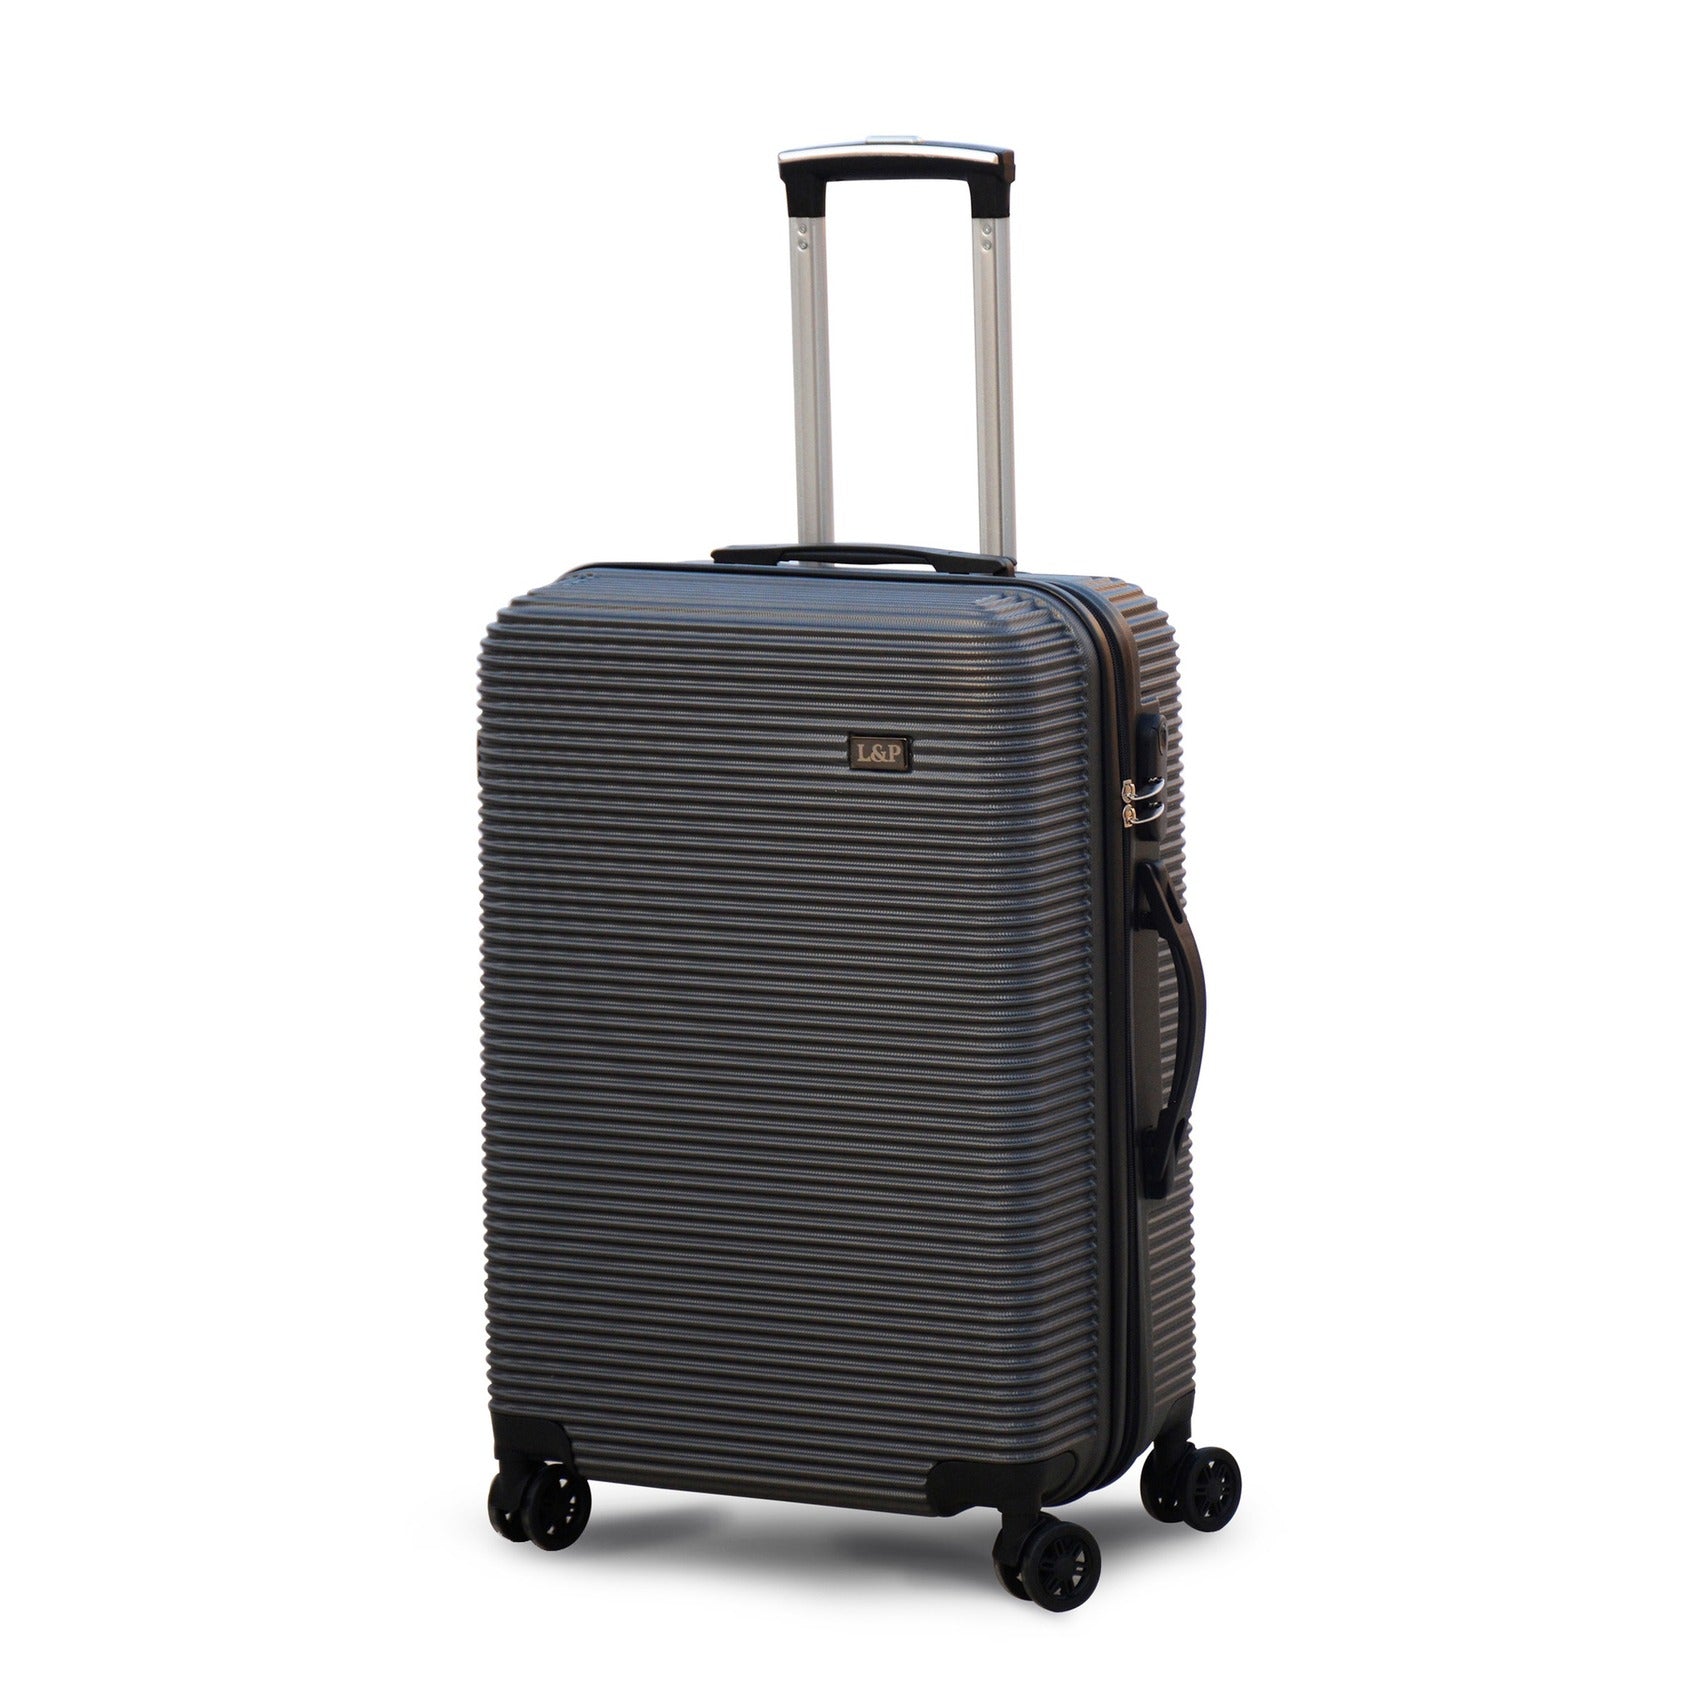 3 Piece Full Set 20" 24" 28 Inches Dark Grey Colour JIAN ABS Line Luggage Lightweight Hard Case Trolley Bag With Spinner Wheel Zaappy.com